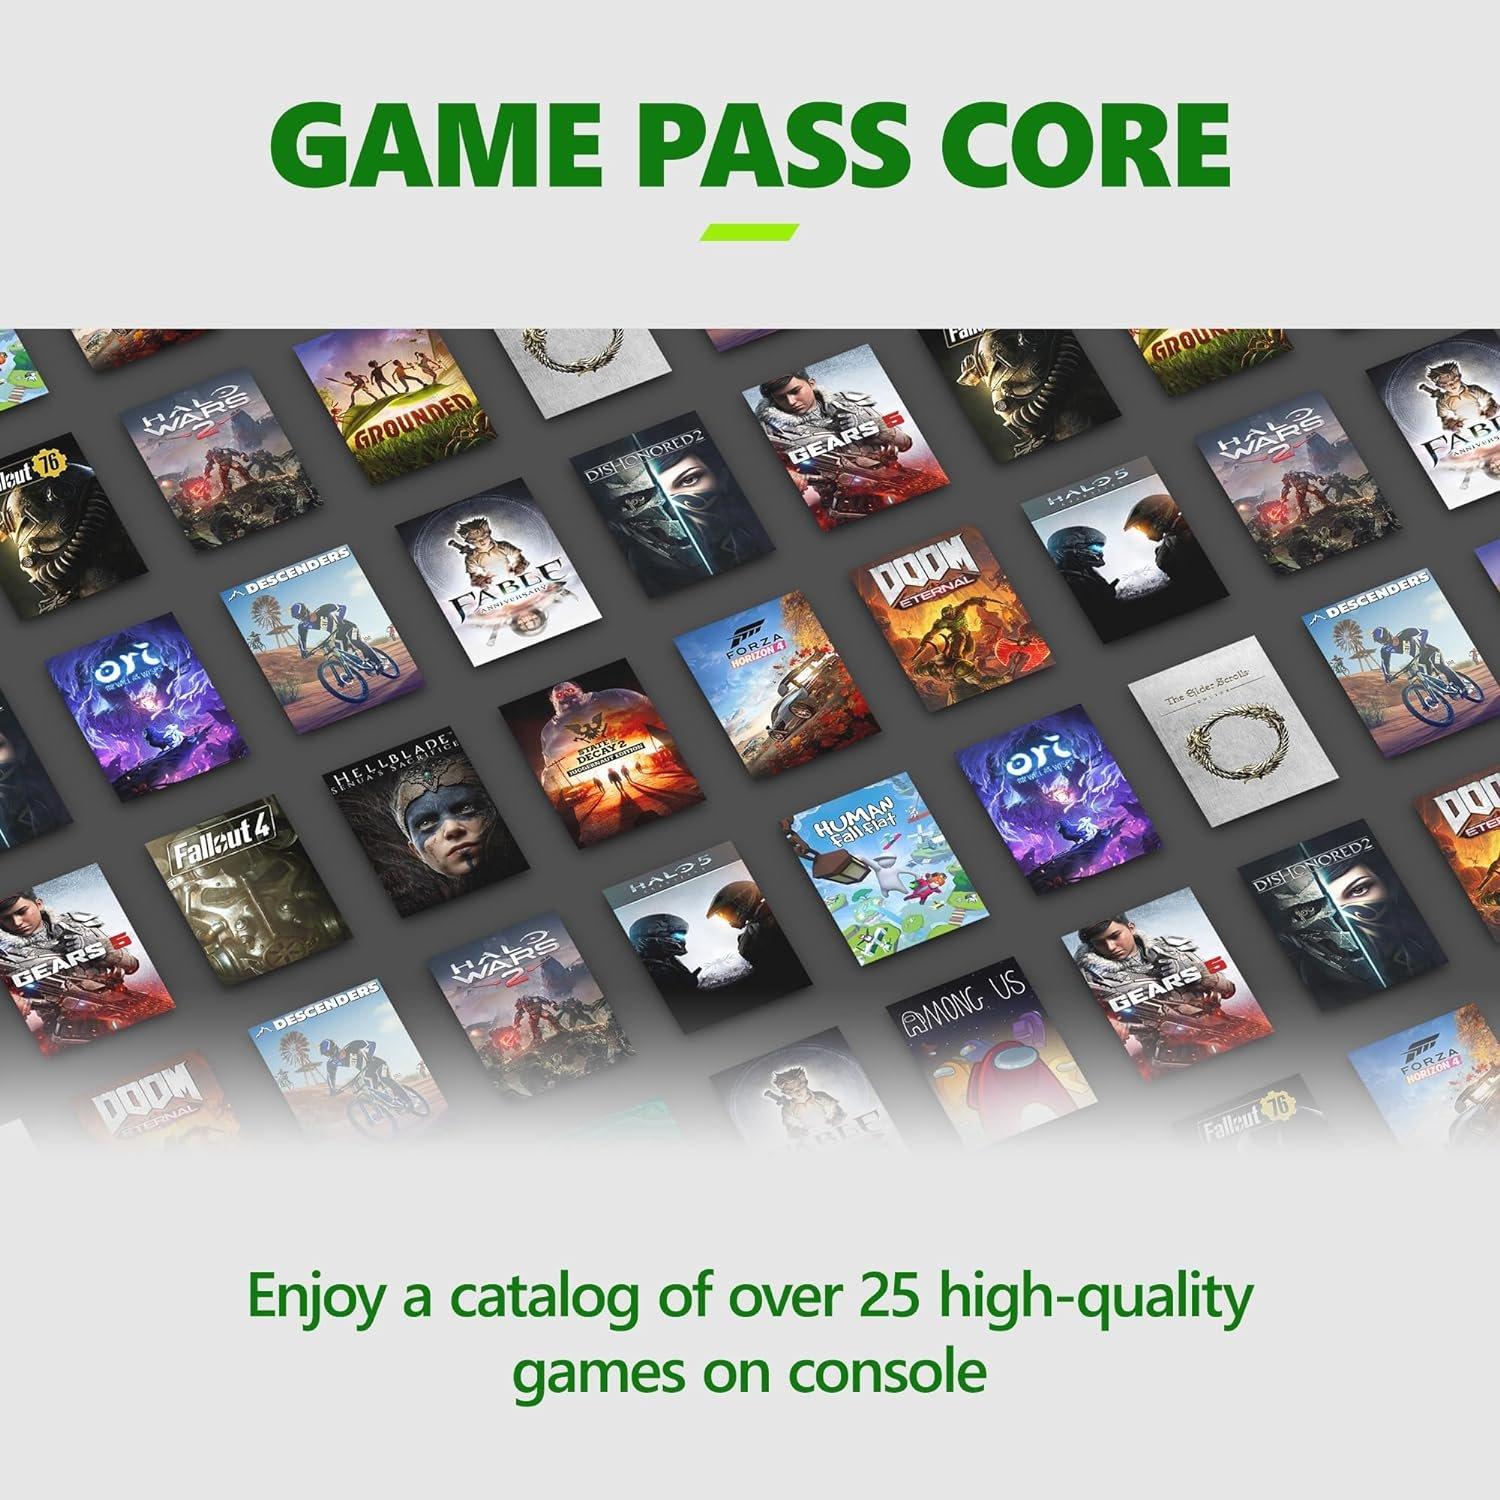 Xbox Game Pass Ultimate 12 Month + Game Pass Core, USA